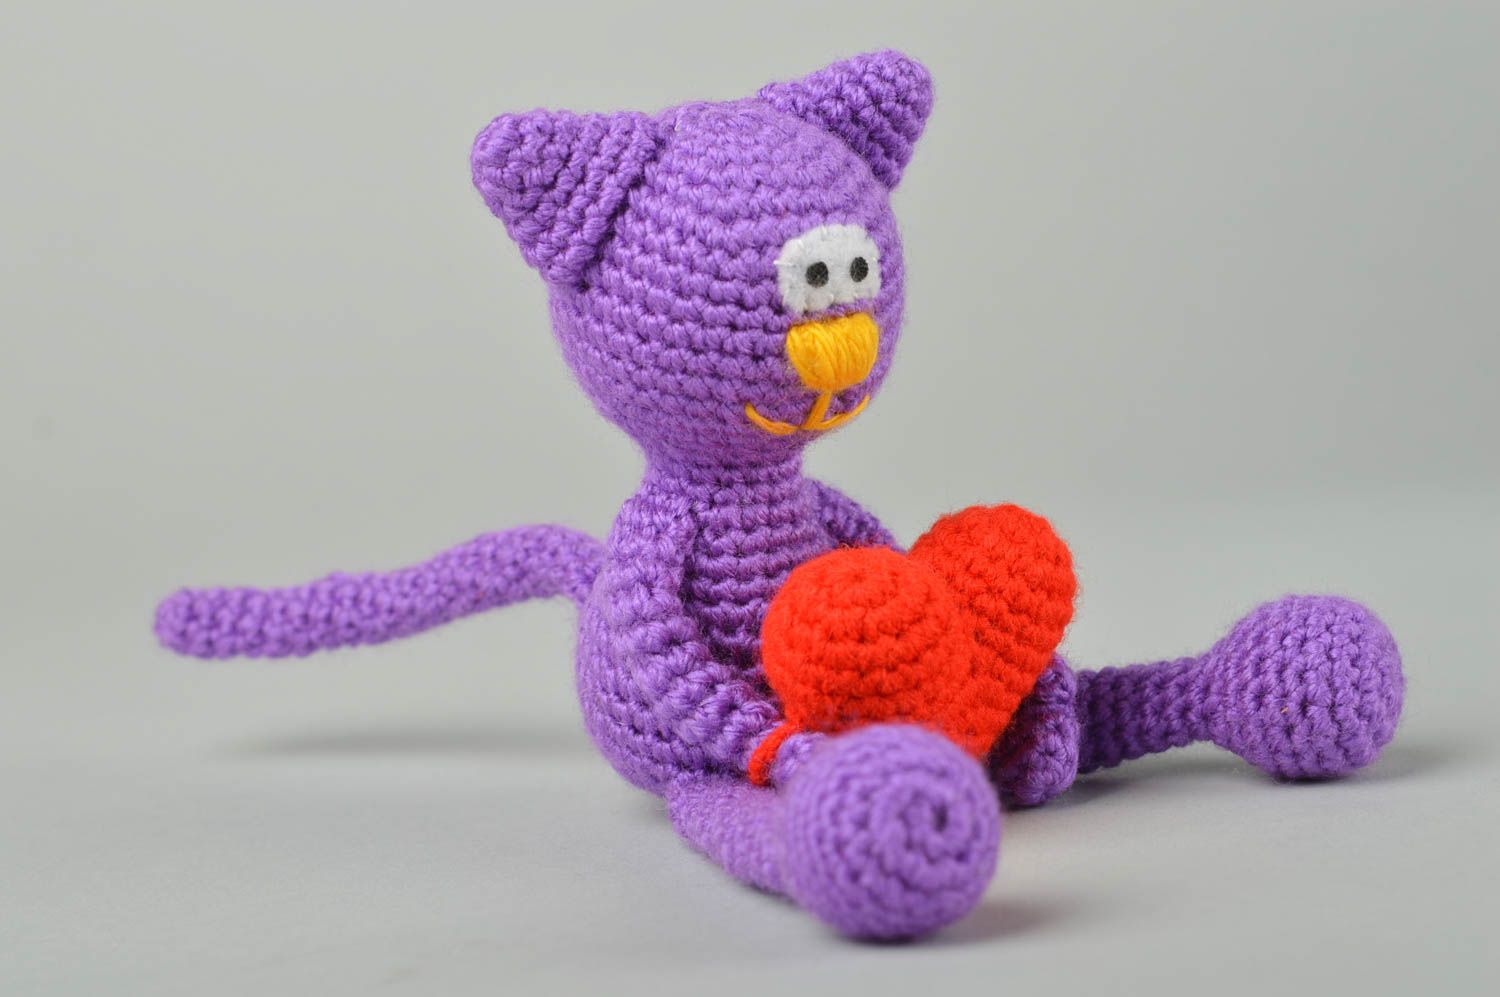 Handmade soft toy violet cat toy baby toys best gifts for kids nursery decor photo 3